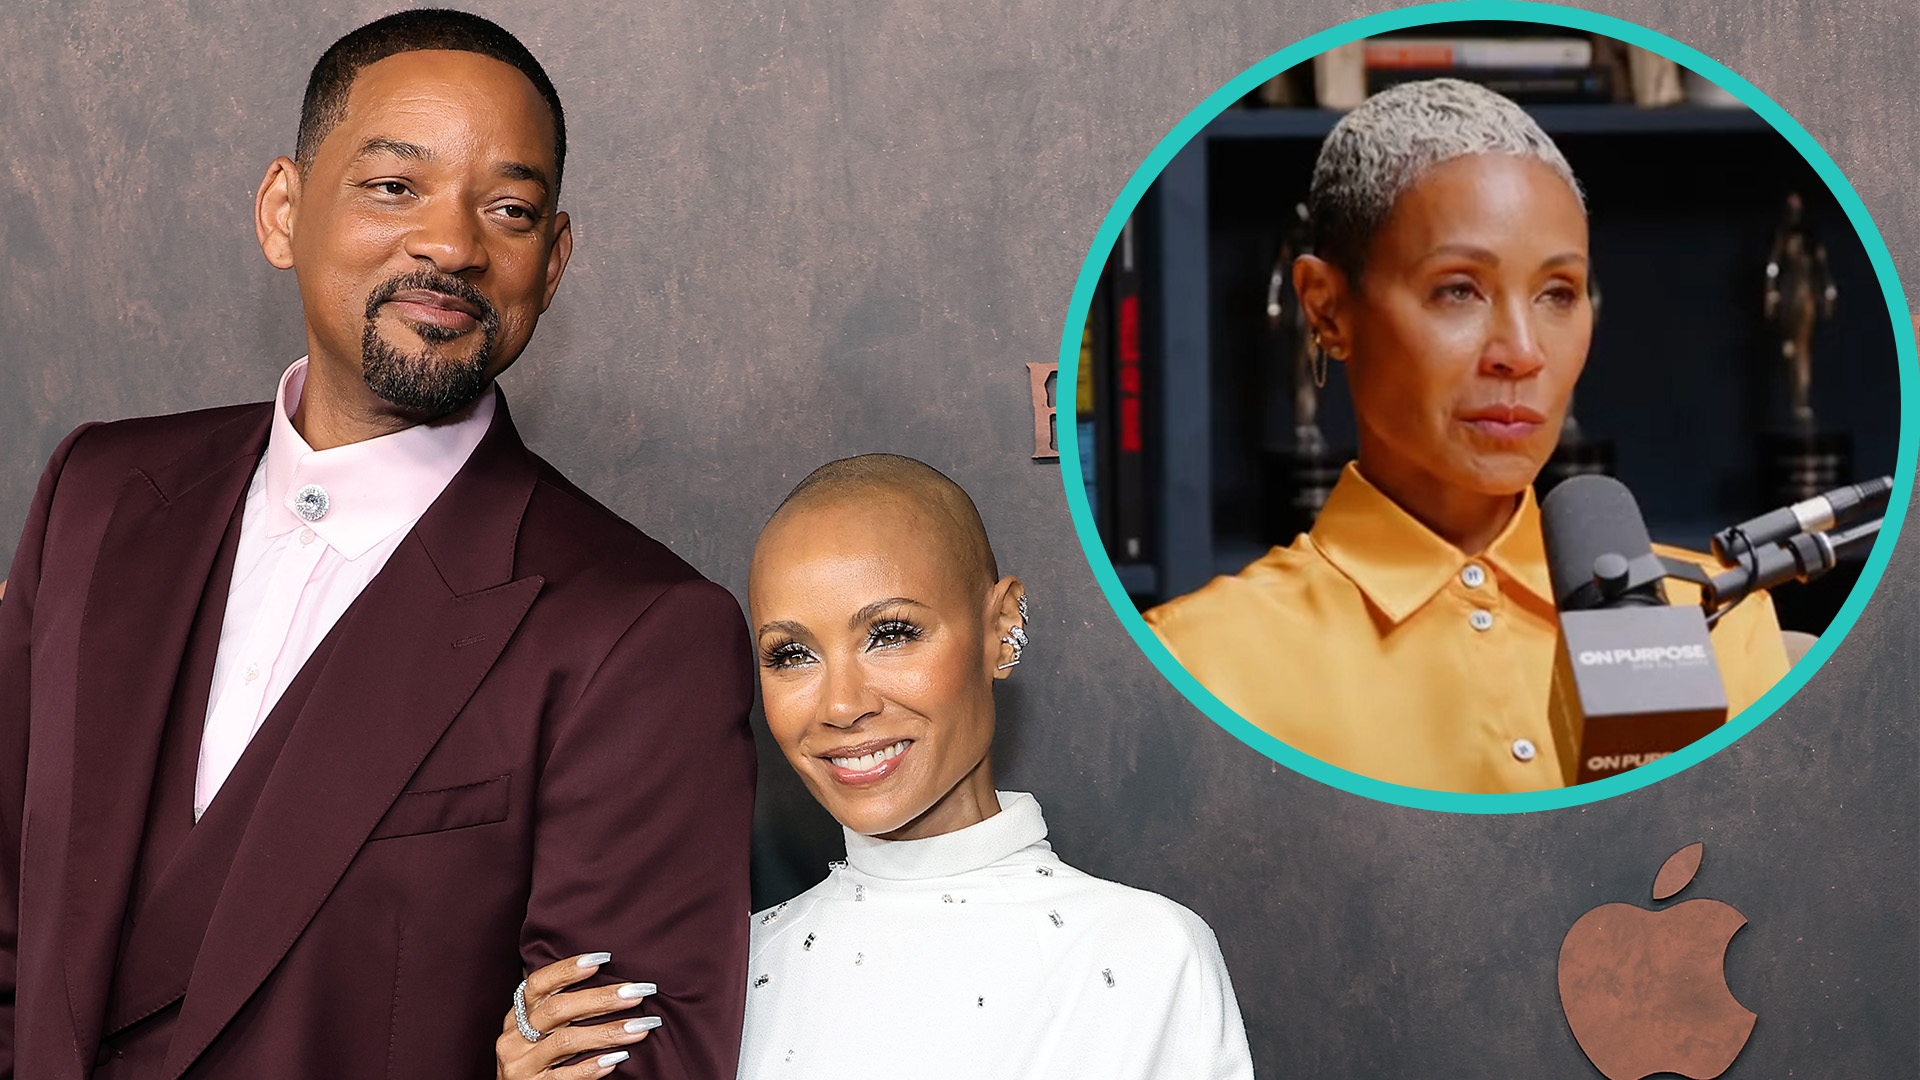 Will and Jada Pinkett Smith have put on 'Worthy' marriage performance